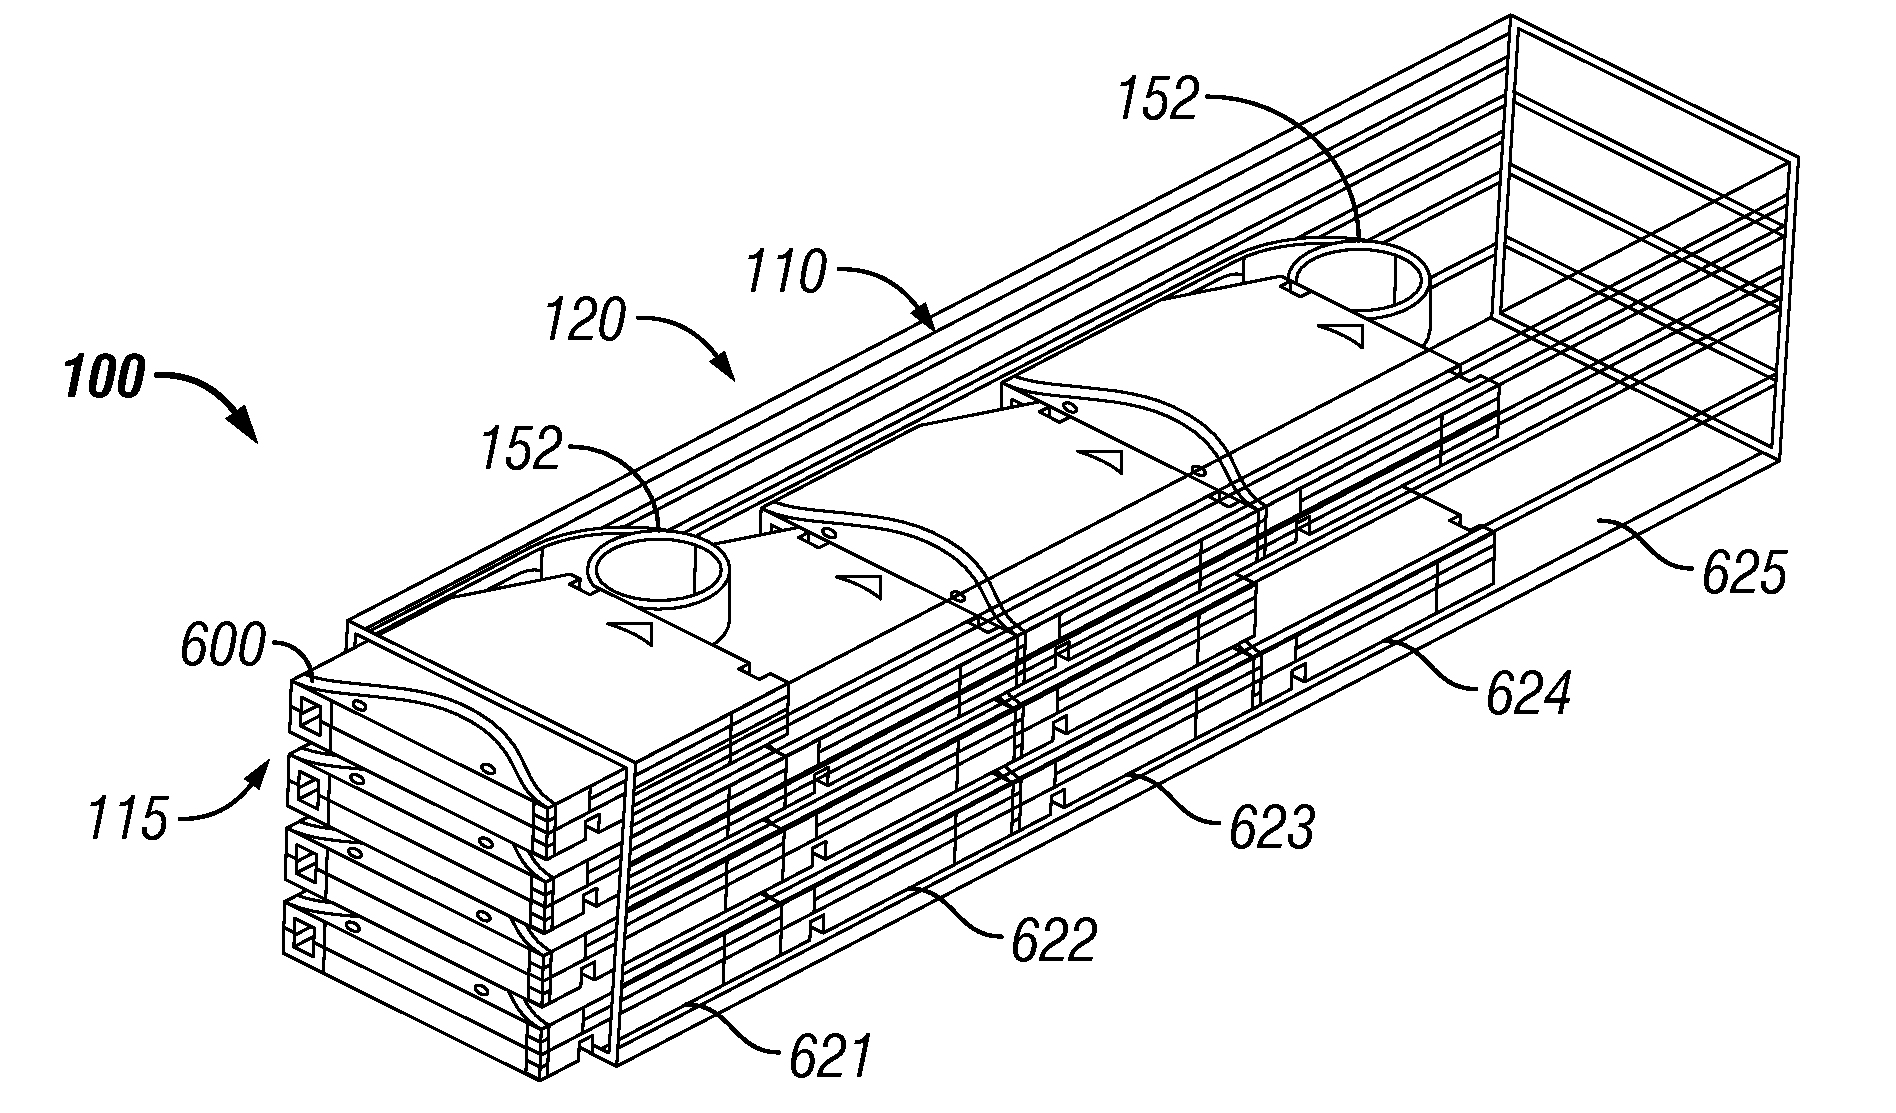 Depth spreading placement of data storage cartridges in multi-cartridge deep slot cells of an automated data storage library